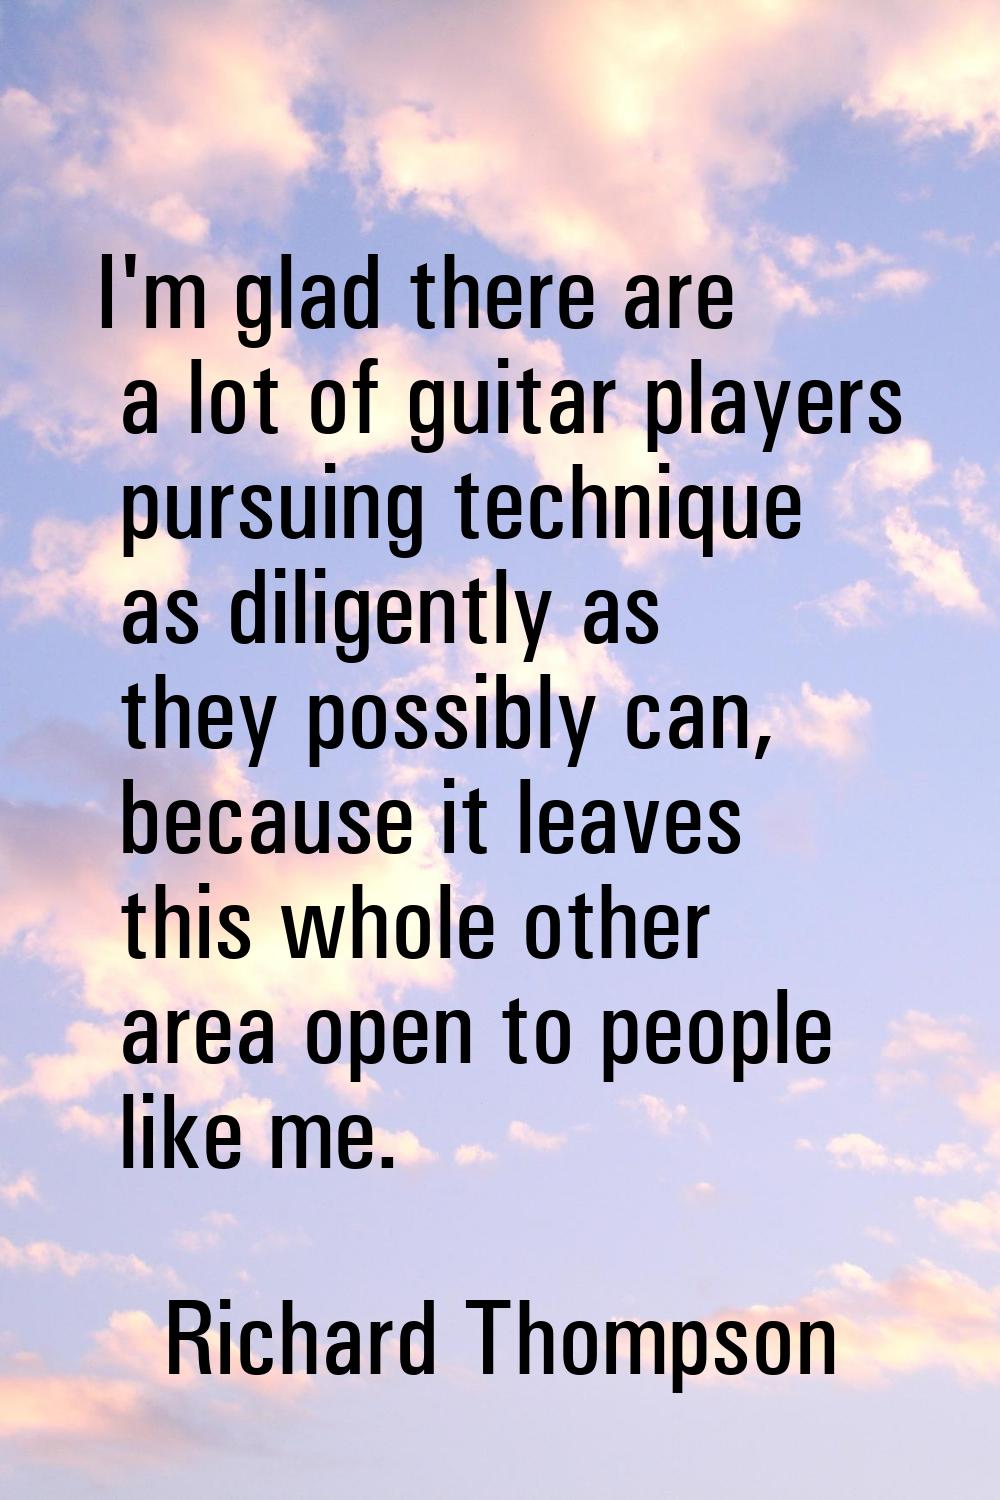 I'm glad there are a lot of guitar players pursuing technique as diligently as they possibly can, b